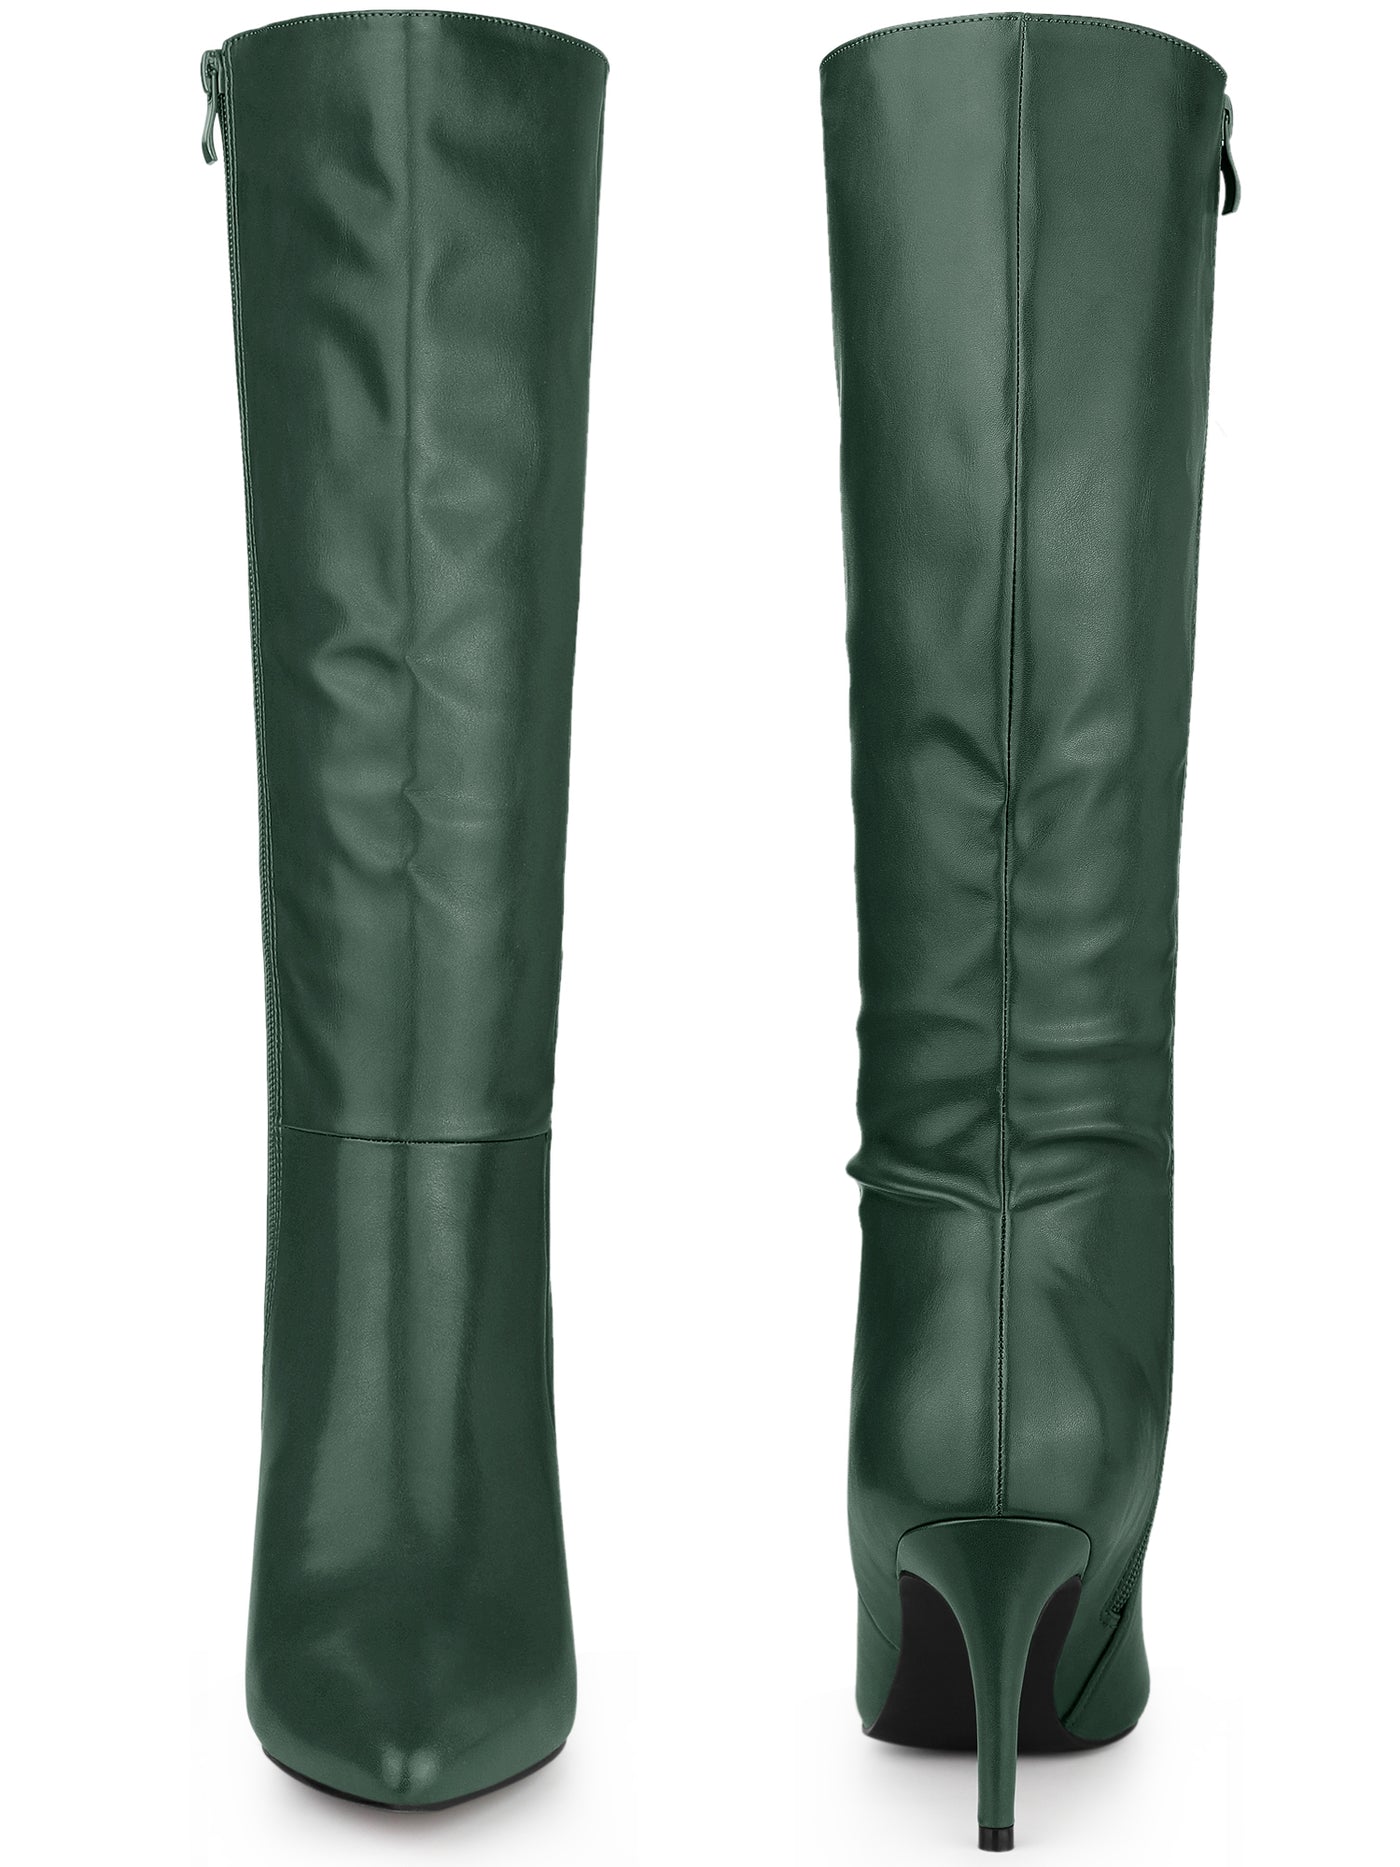 Bublédon Perphy Pointed Toe Side Zipper Knee High Boots for Women